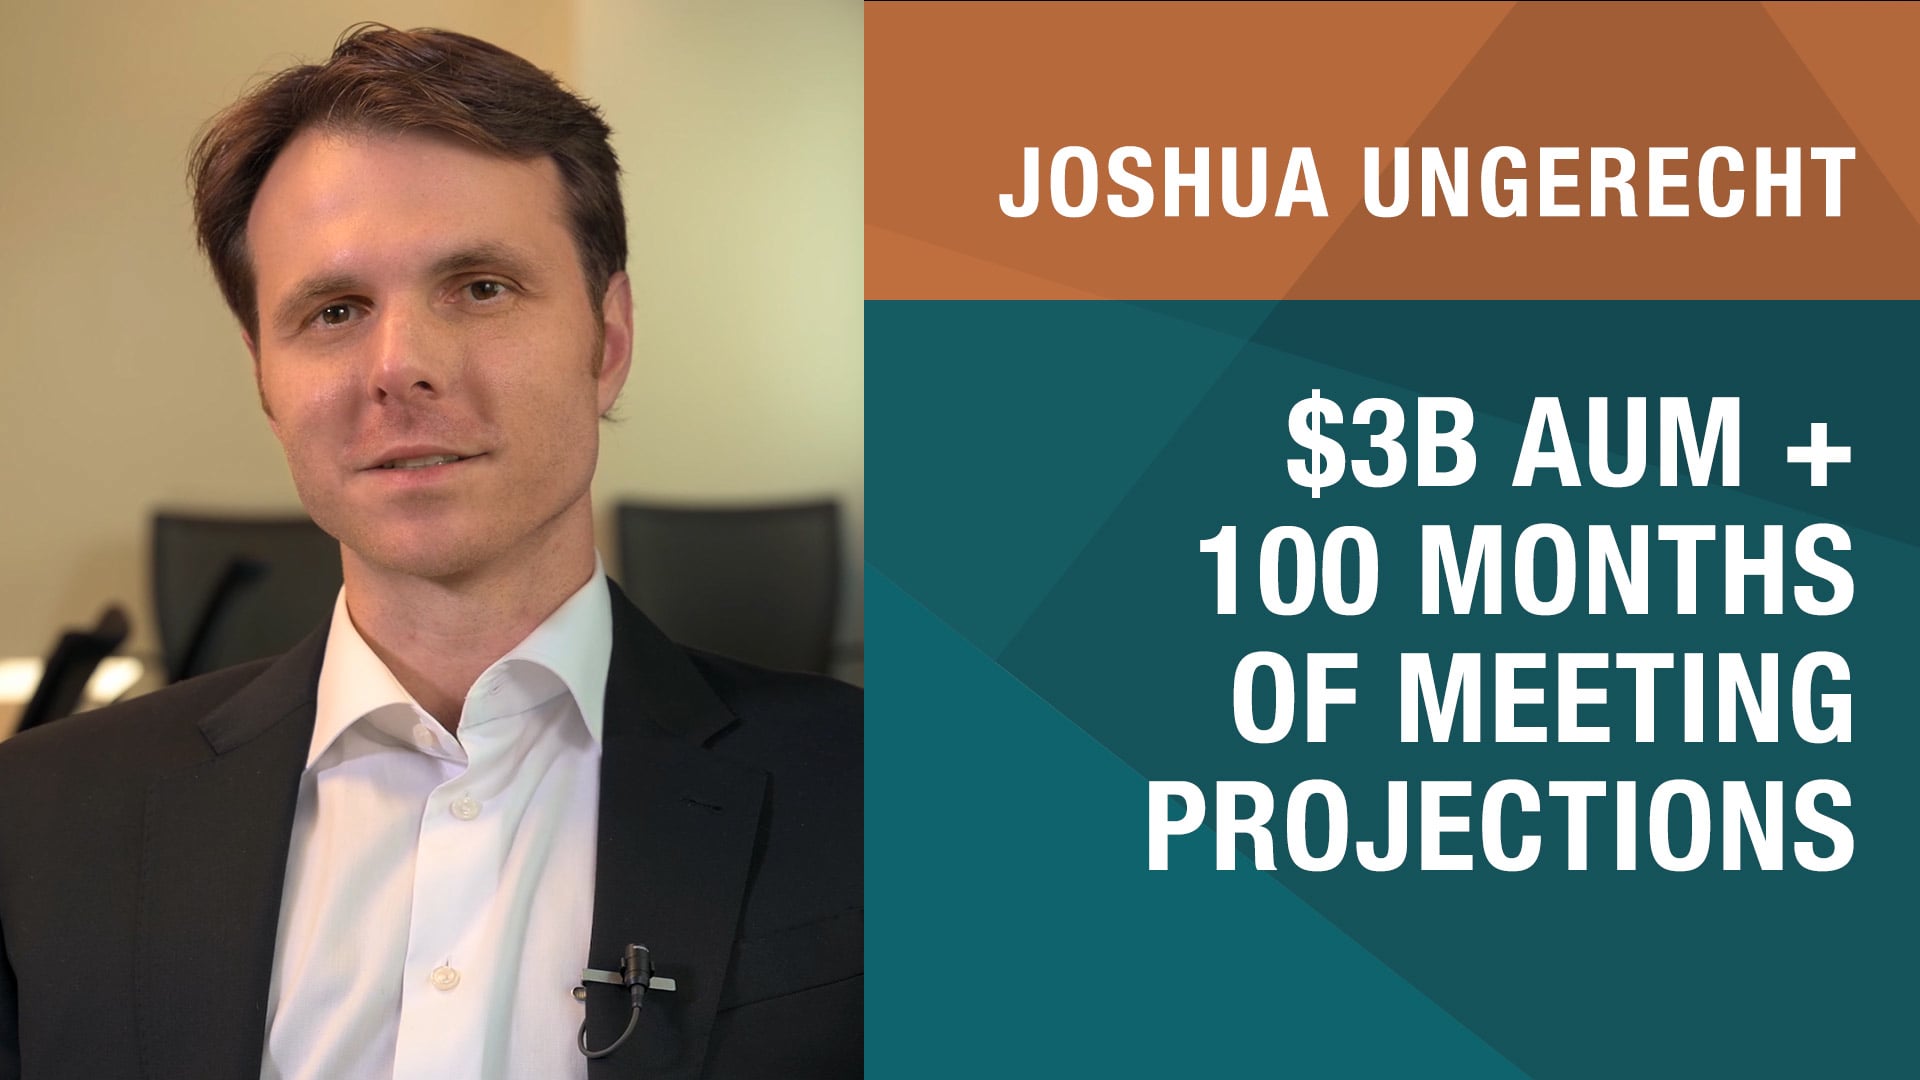 $3B AUM + 100 Months of Meeting Projections